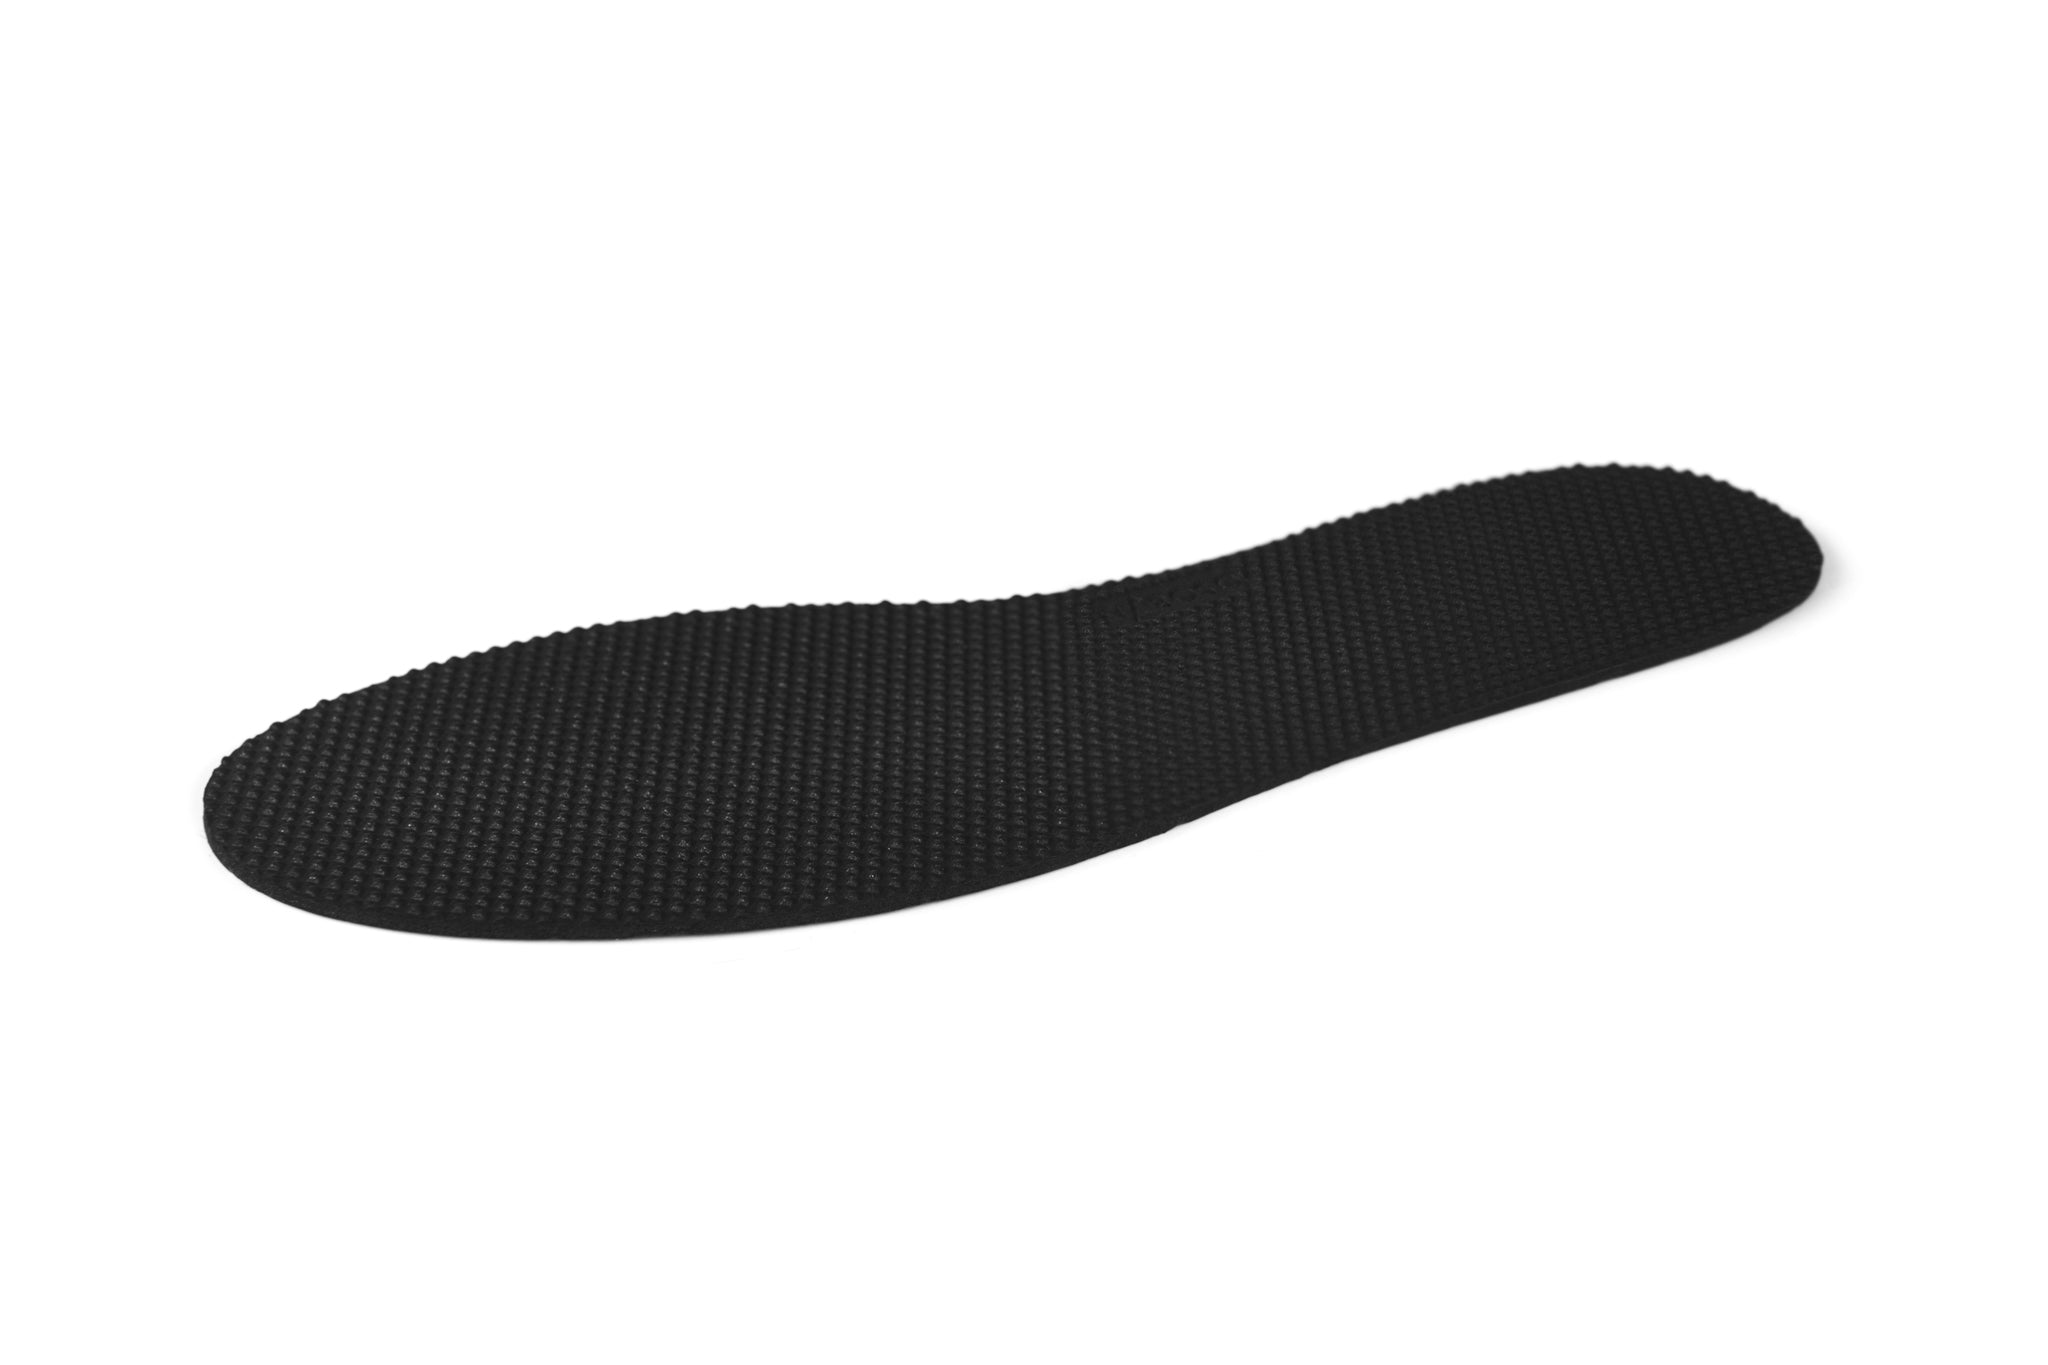 Photo showing the Children's Insole & the texture of the insole